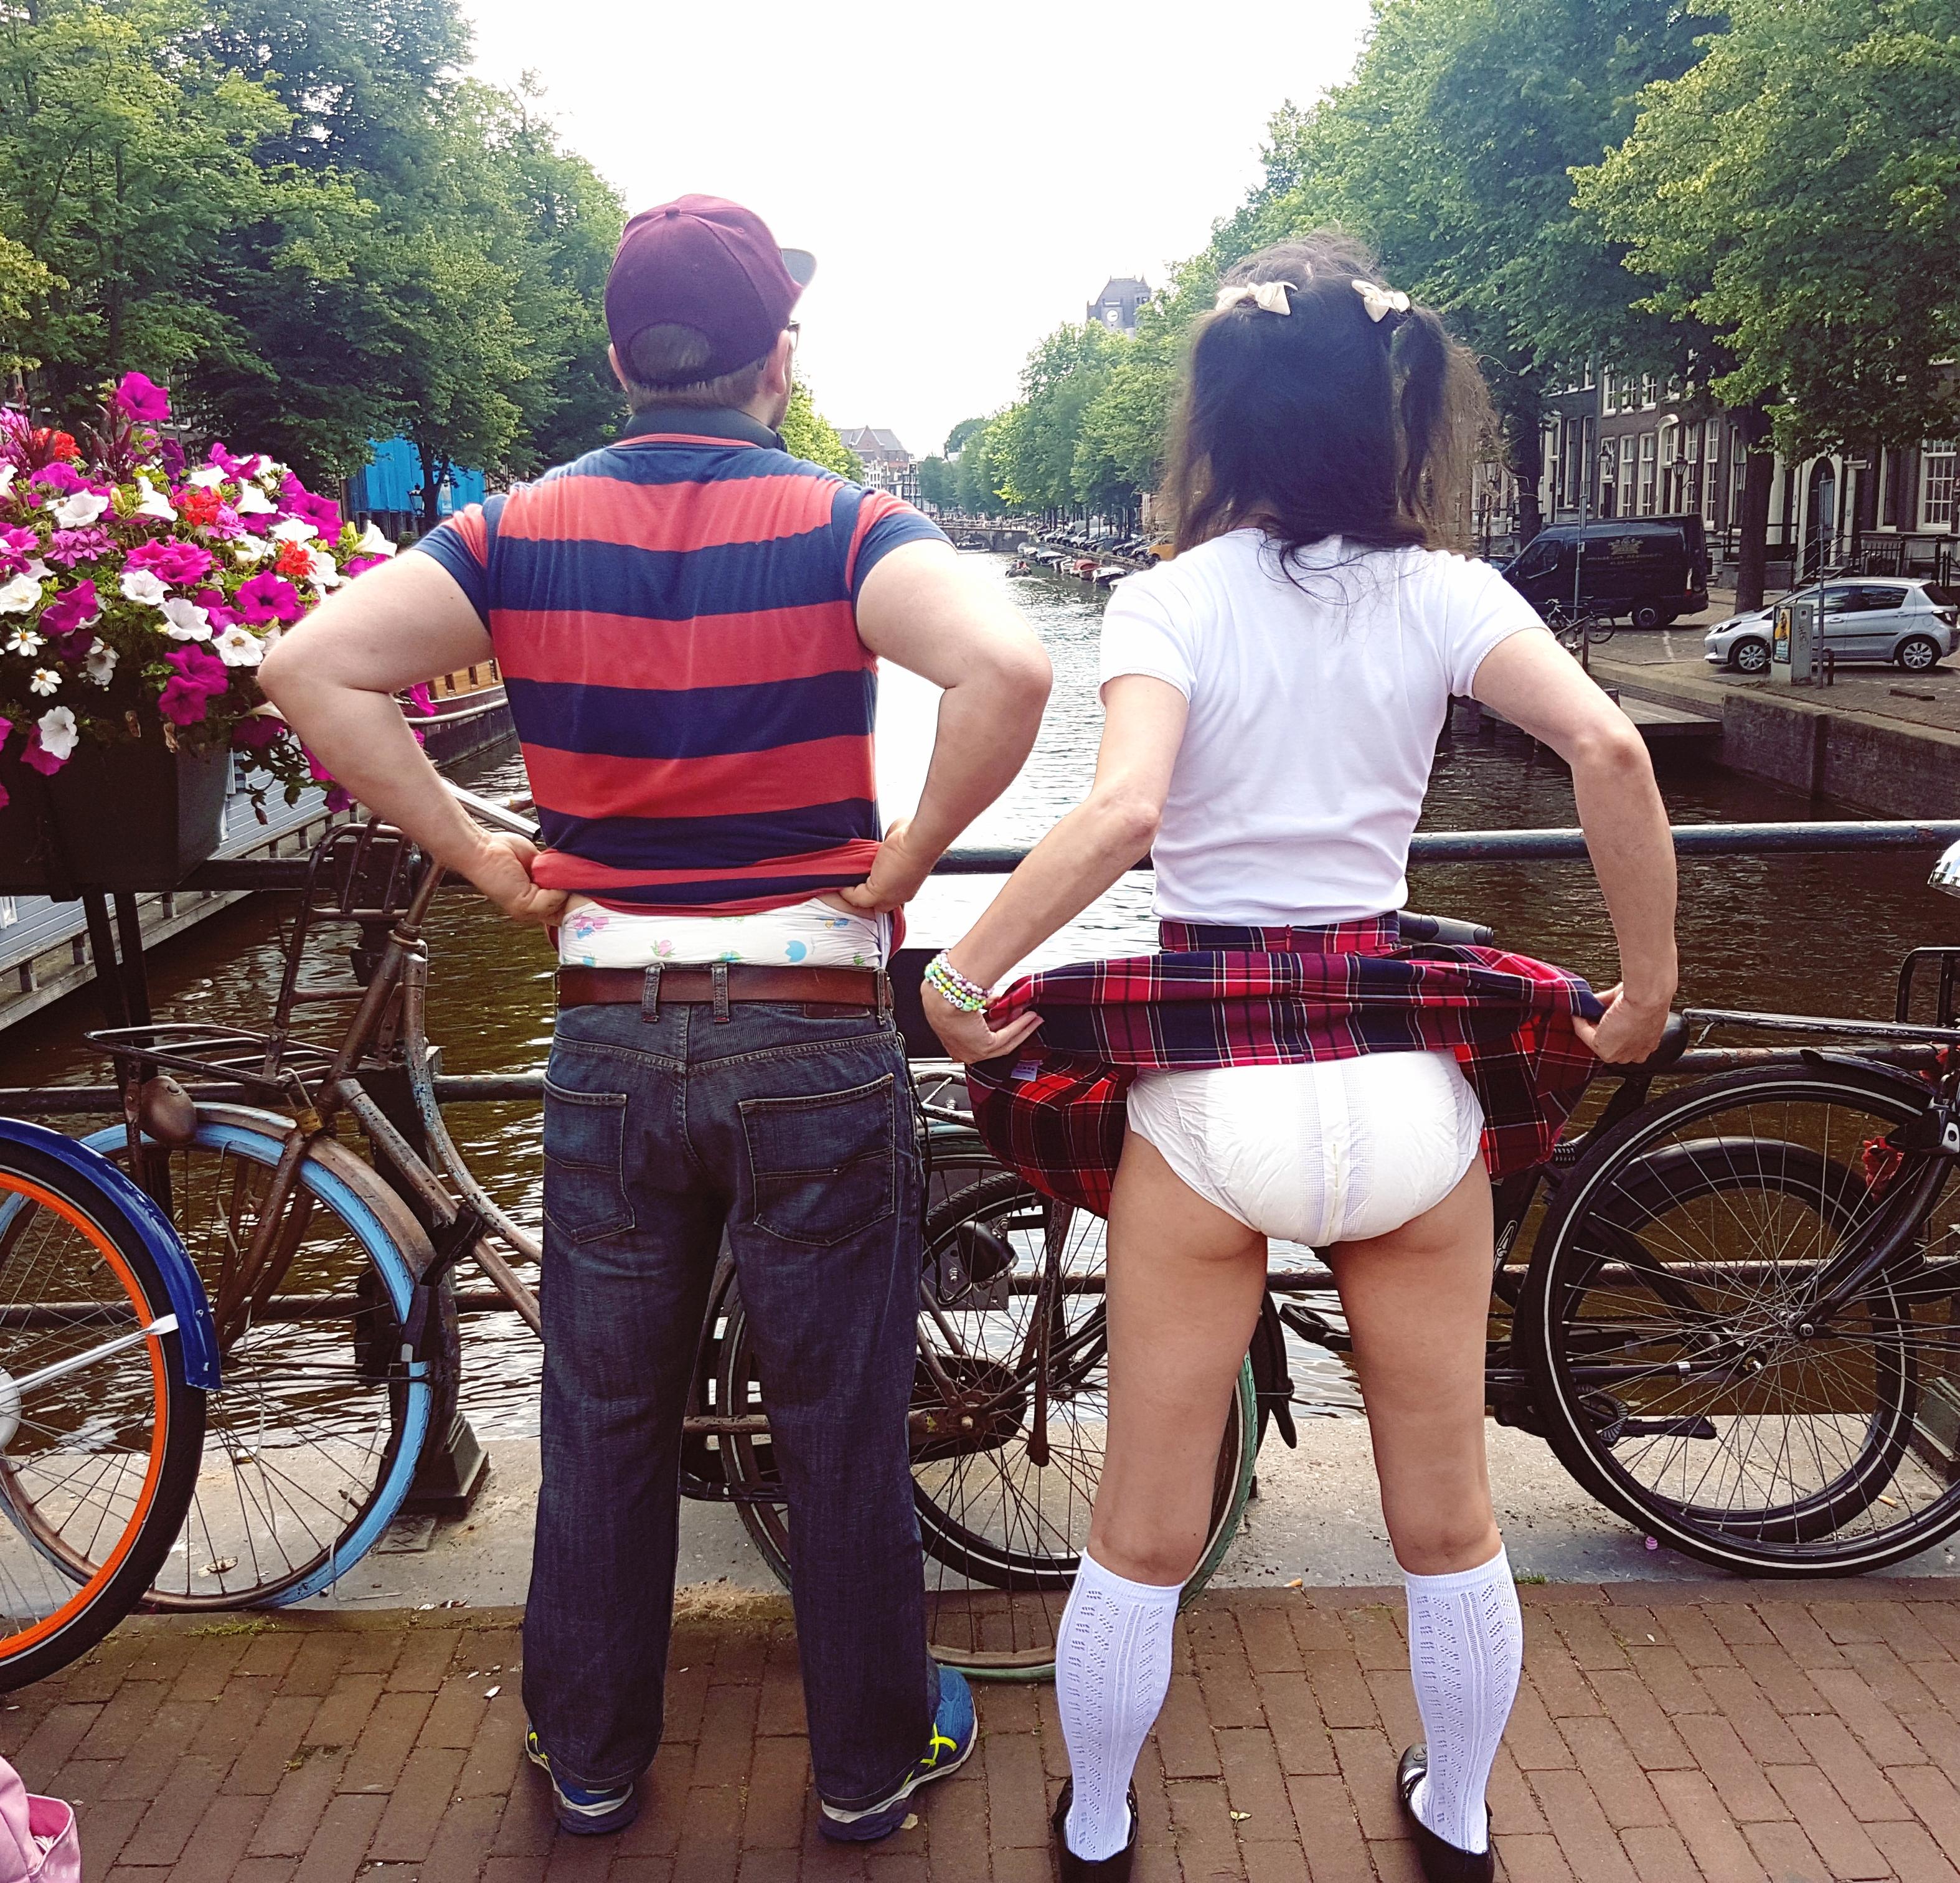 Me and my friend LittleRobbiee enjoyed our walk along the Amsterdam canals in matching clothes and matching underwear 